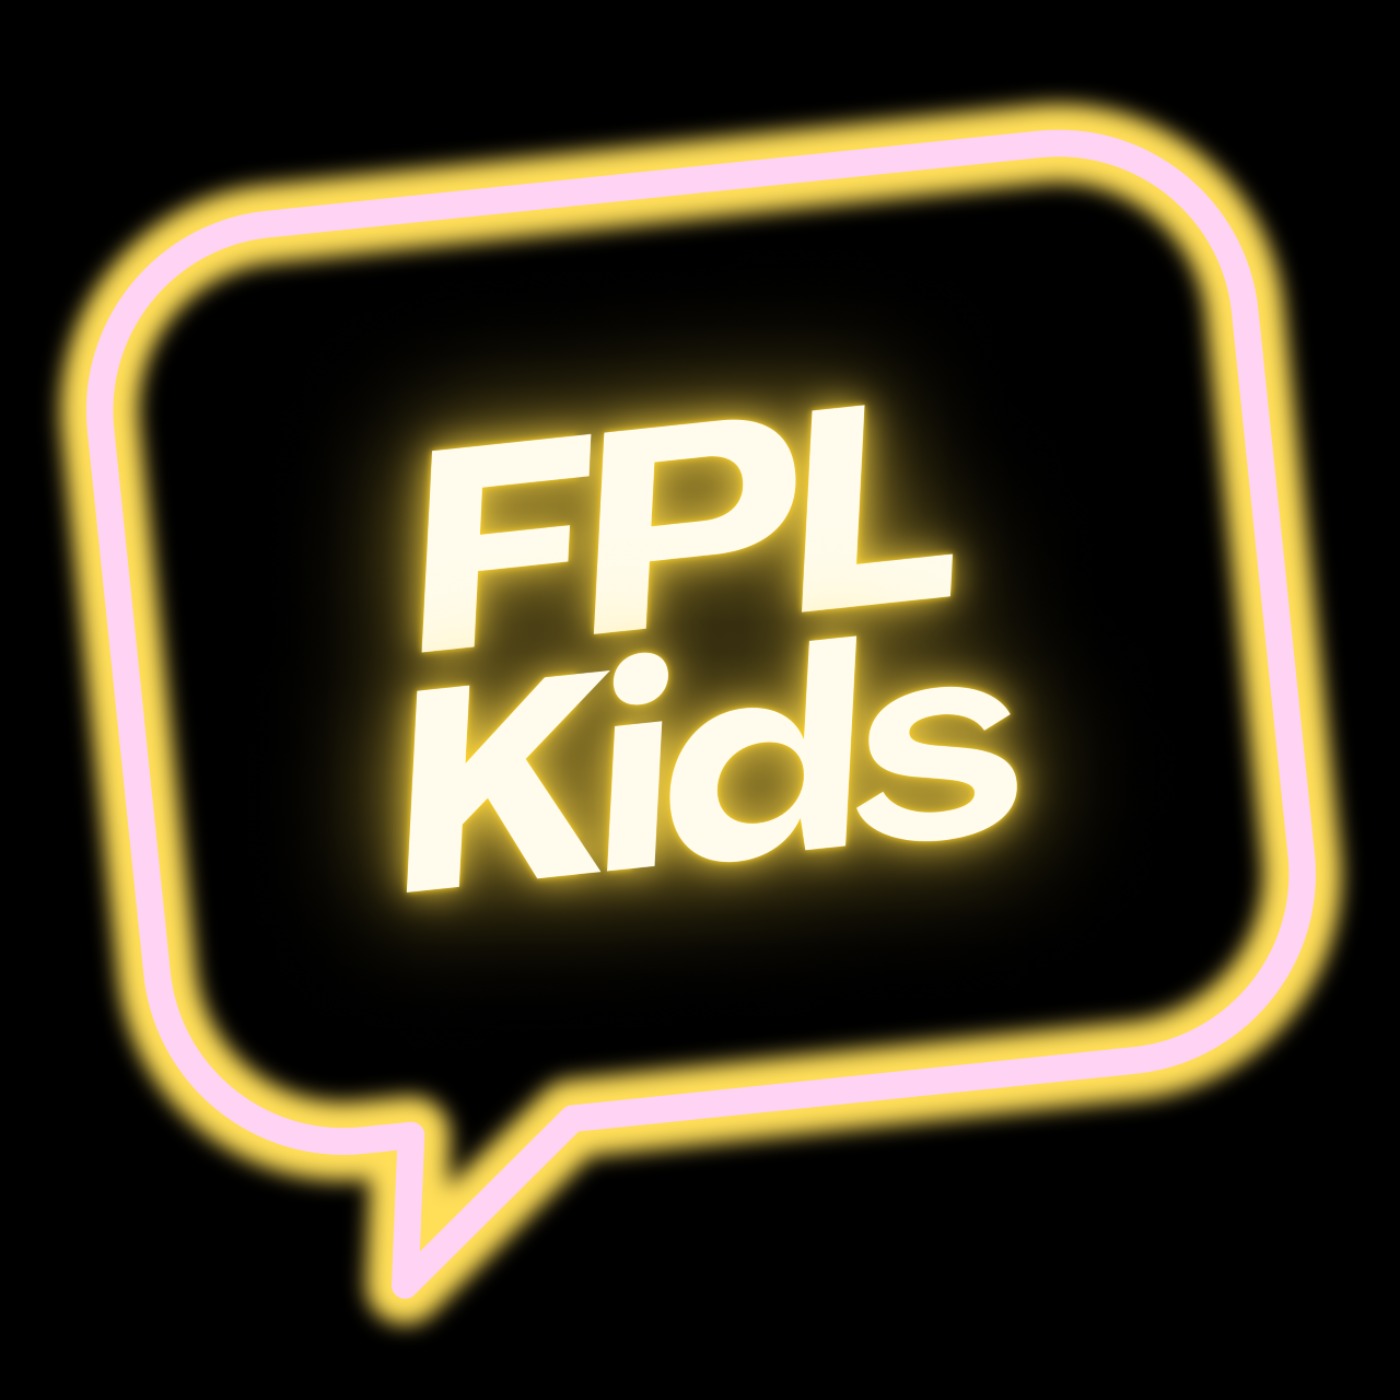 cover art for FPL Kids: Episode 89 ("Don't stop me now!")